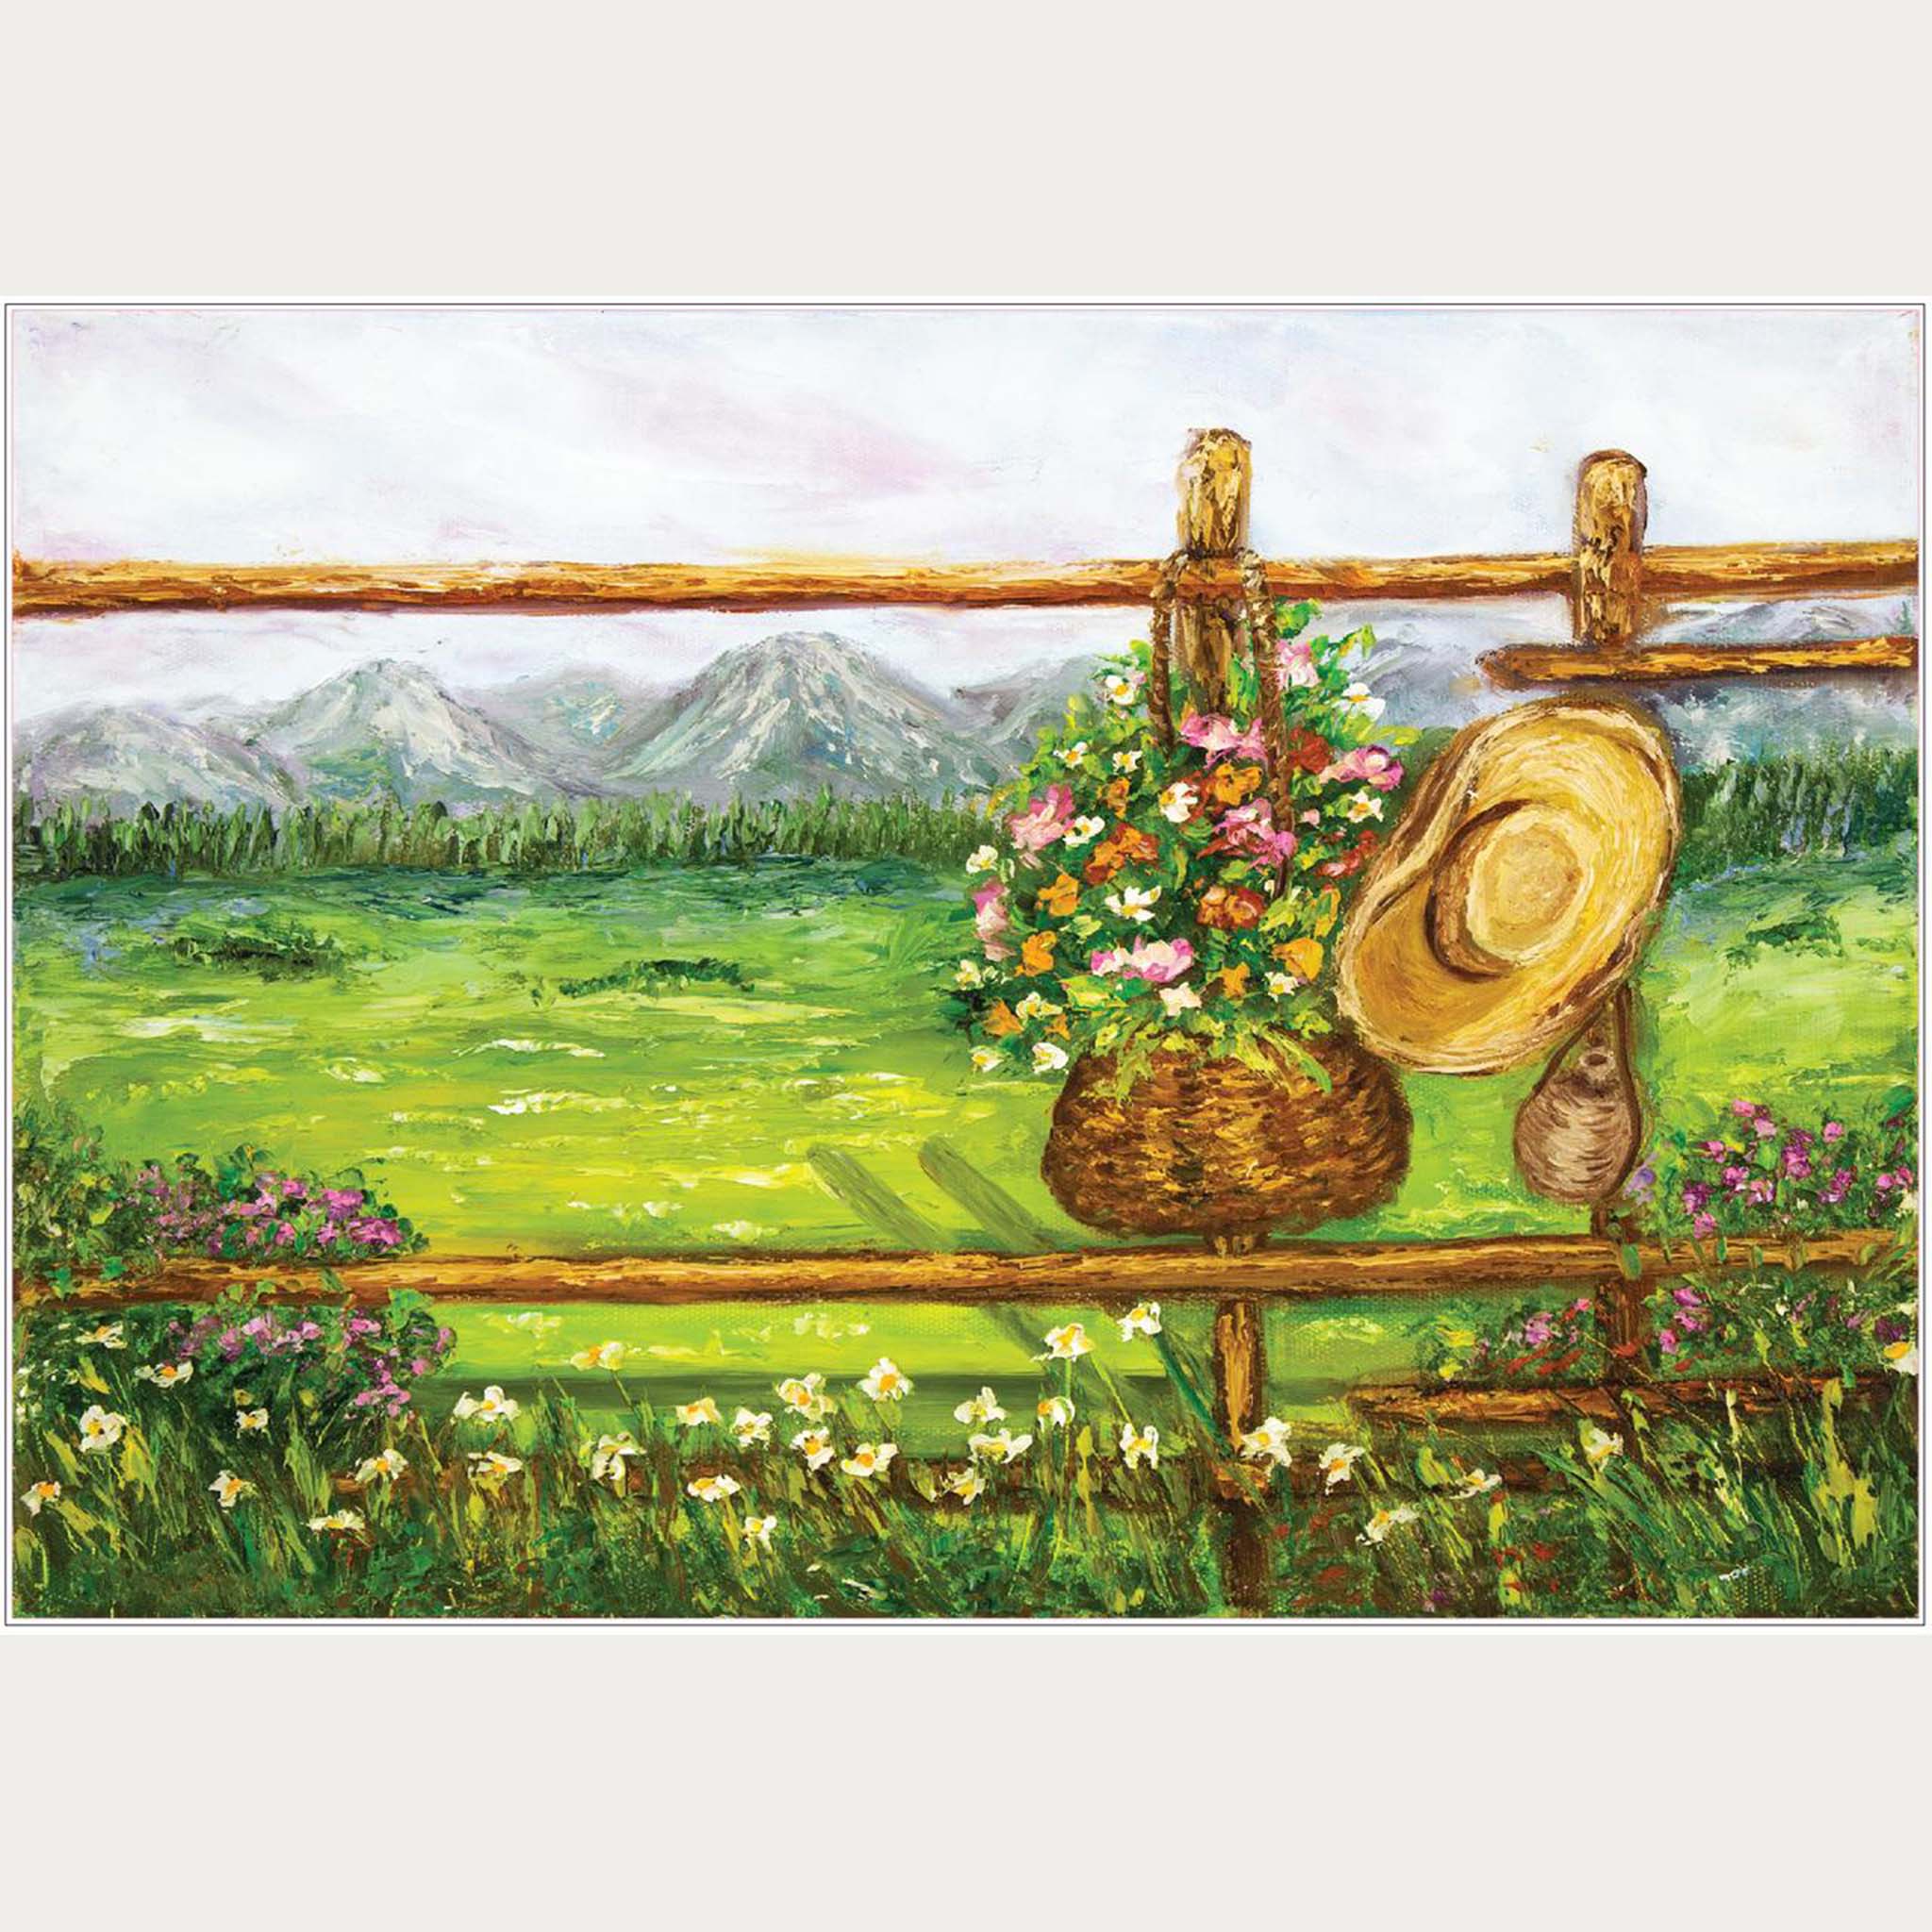 A1 rice paper design that features a painting of a wood fence with a basket of flowers and hat hanging on it. In the background is a grass field and mountains in the distance.